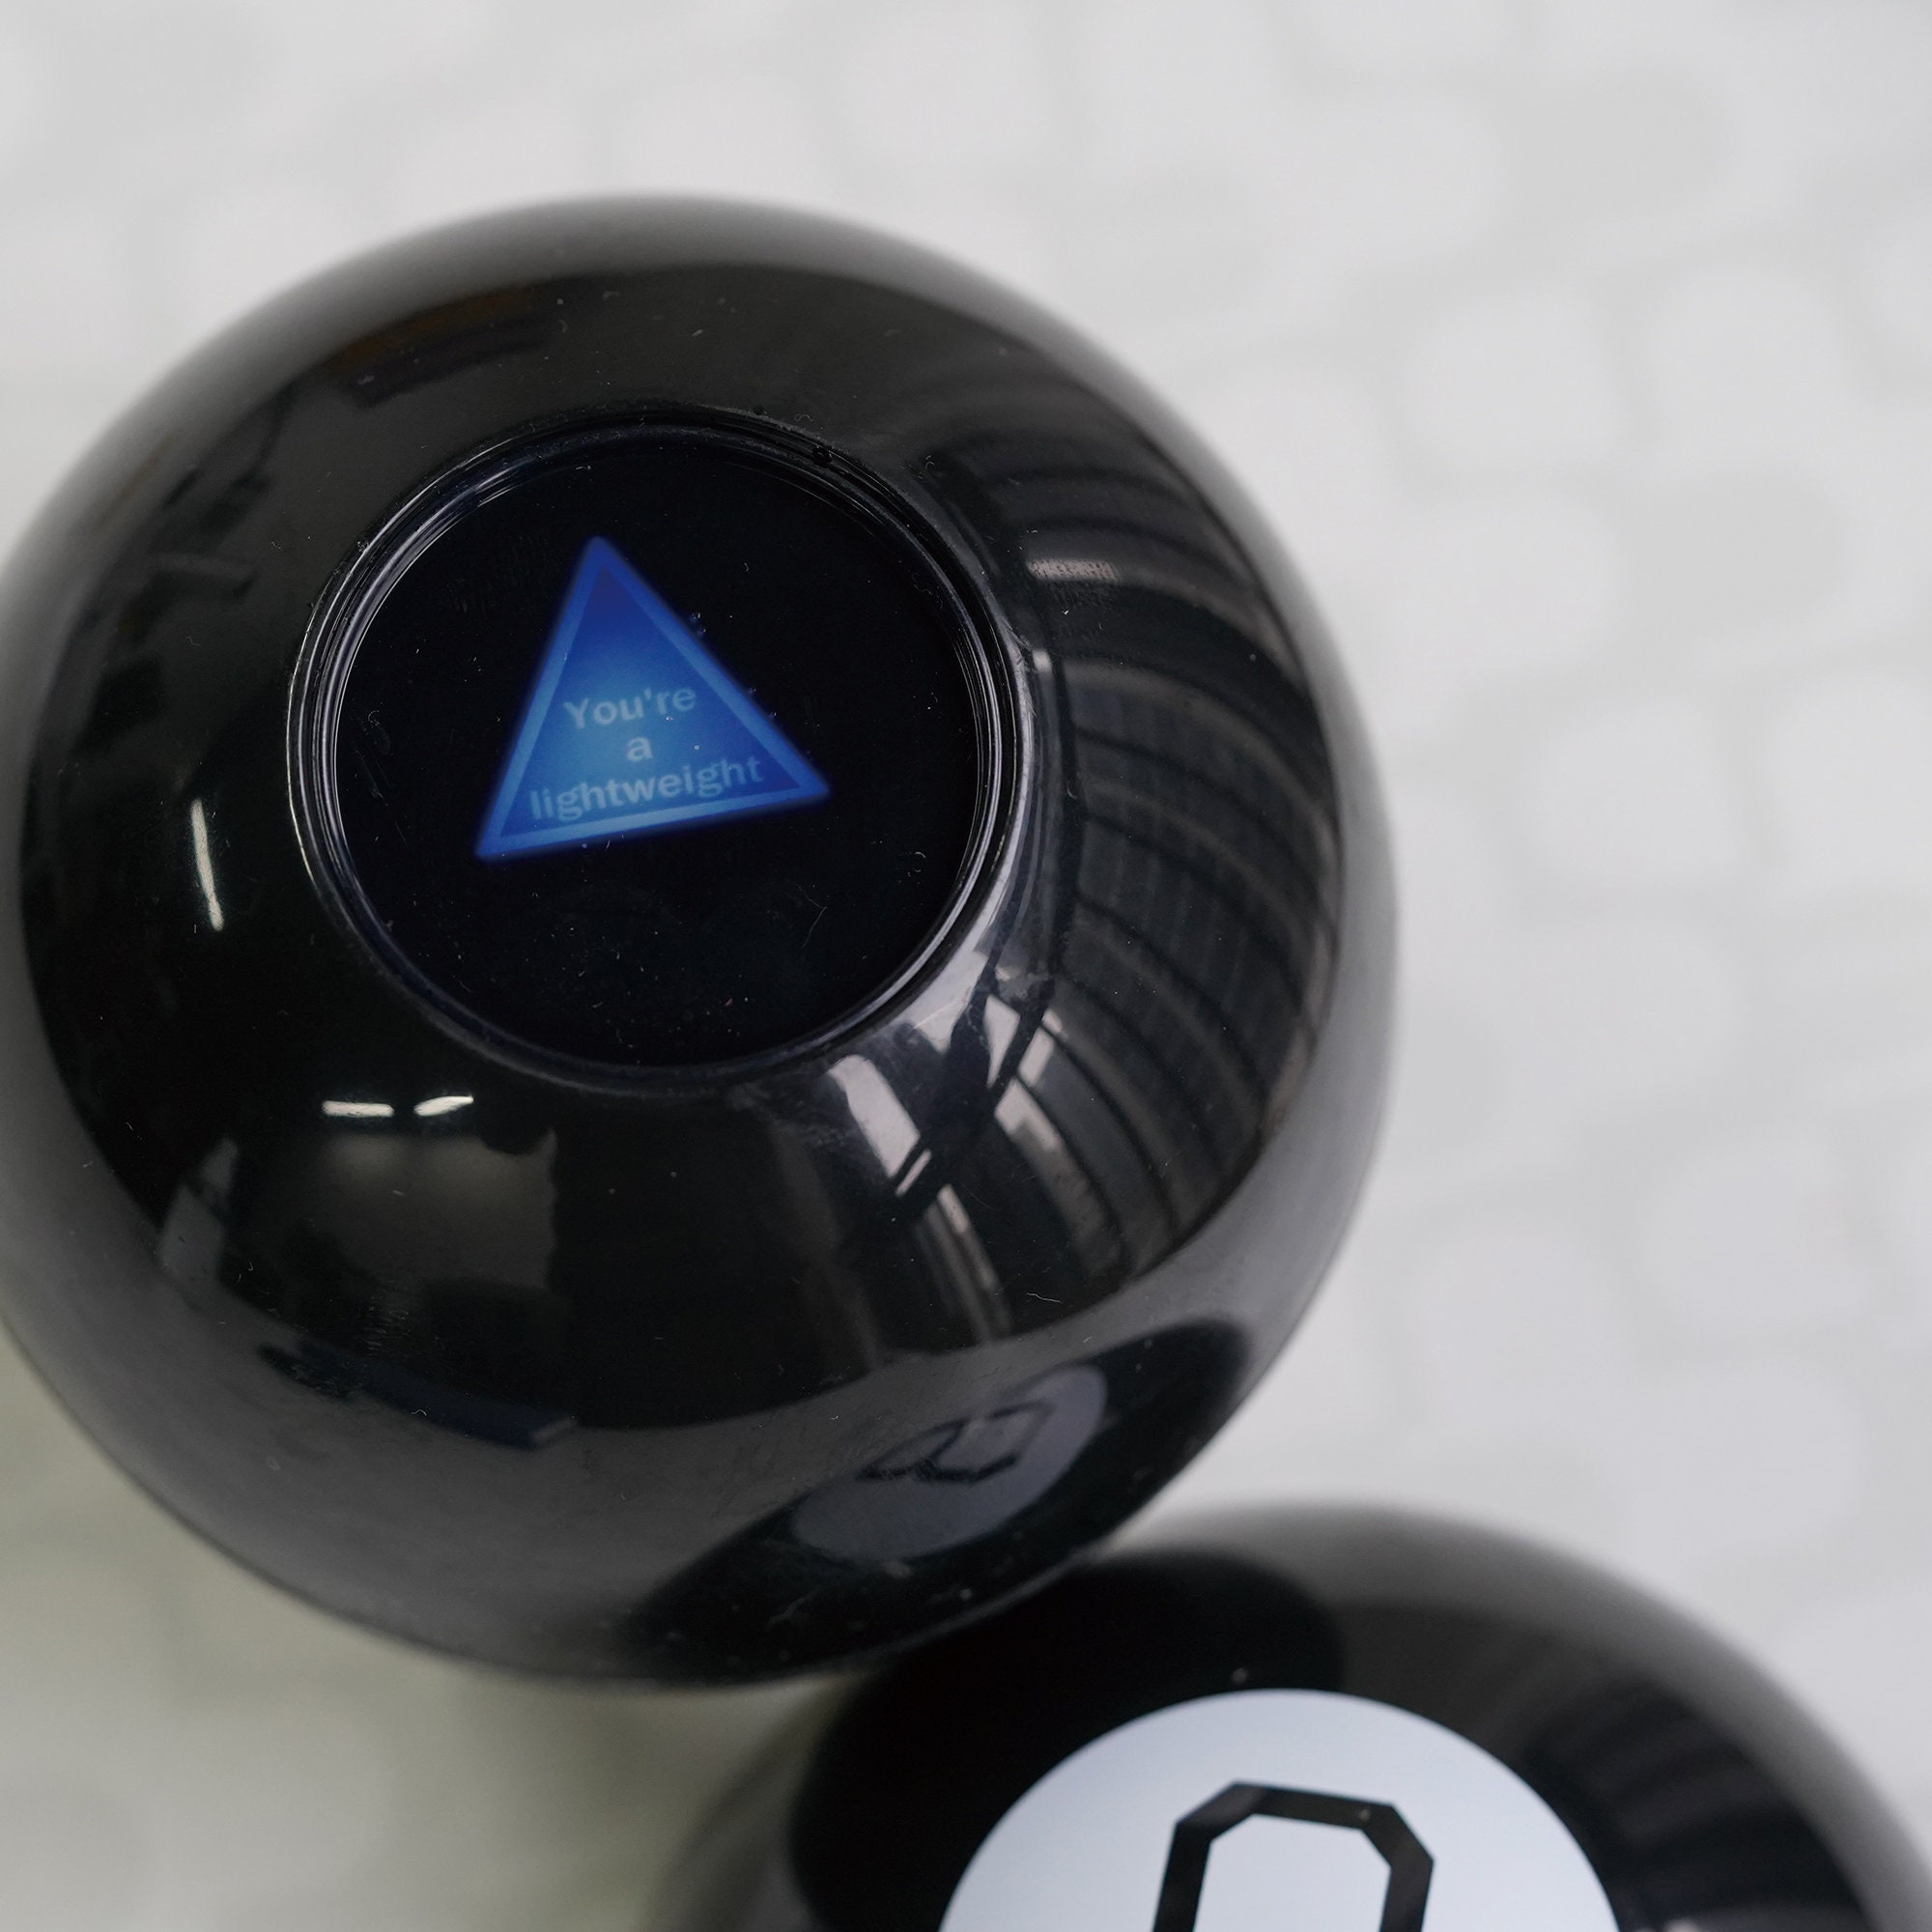 The history of the Magic 8 Ball - The Hustle